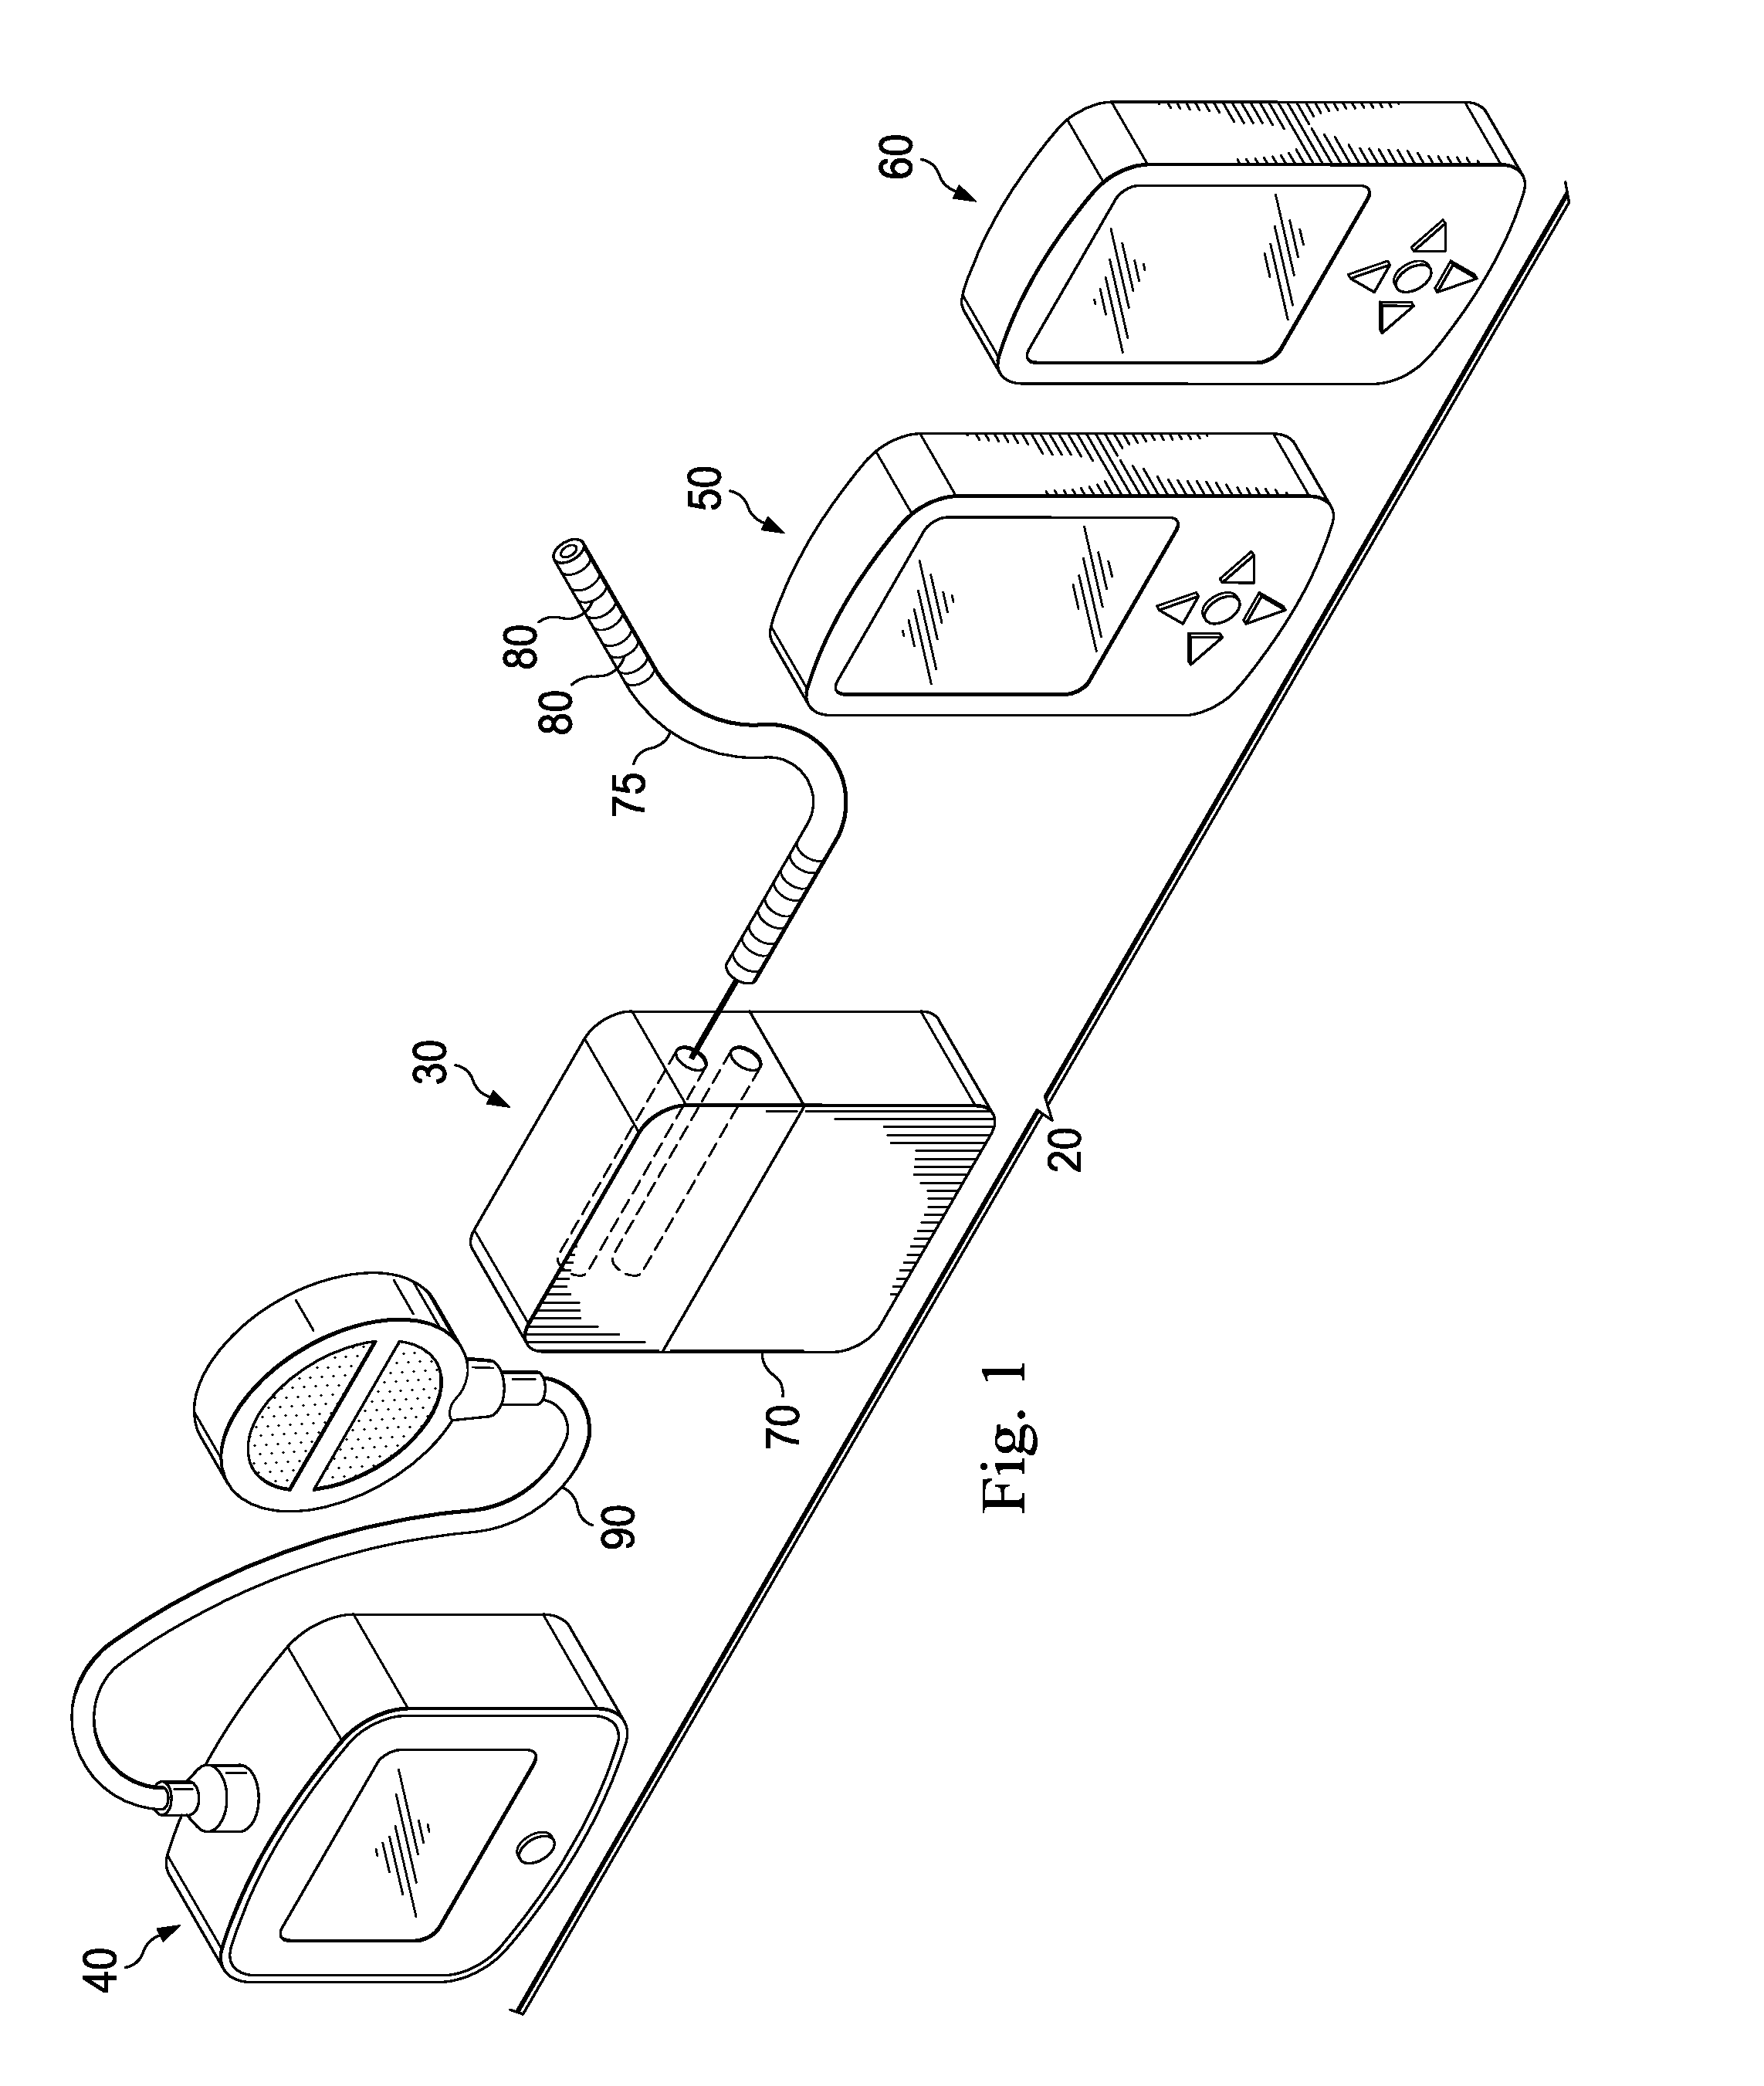 Method and System of Suggesting Spinal Cord Stimulation Region Based on Pain and Stimulation Maps with a Clinician Programmer